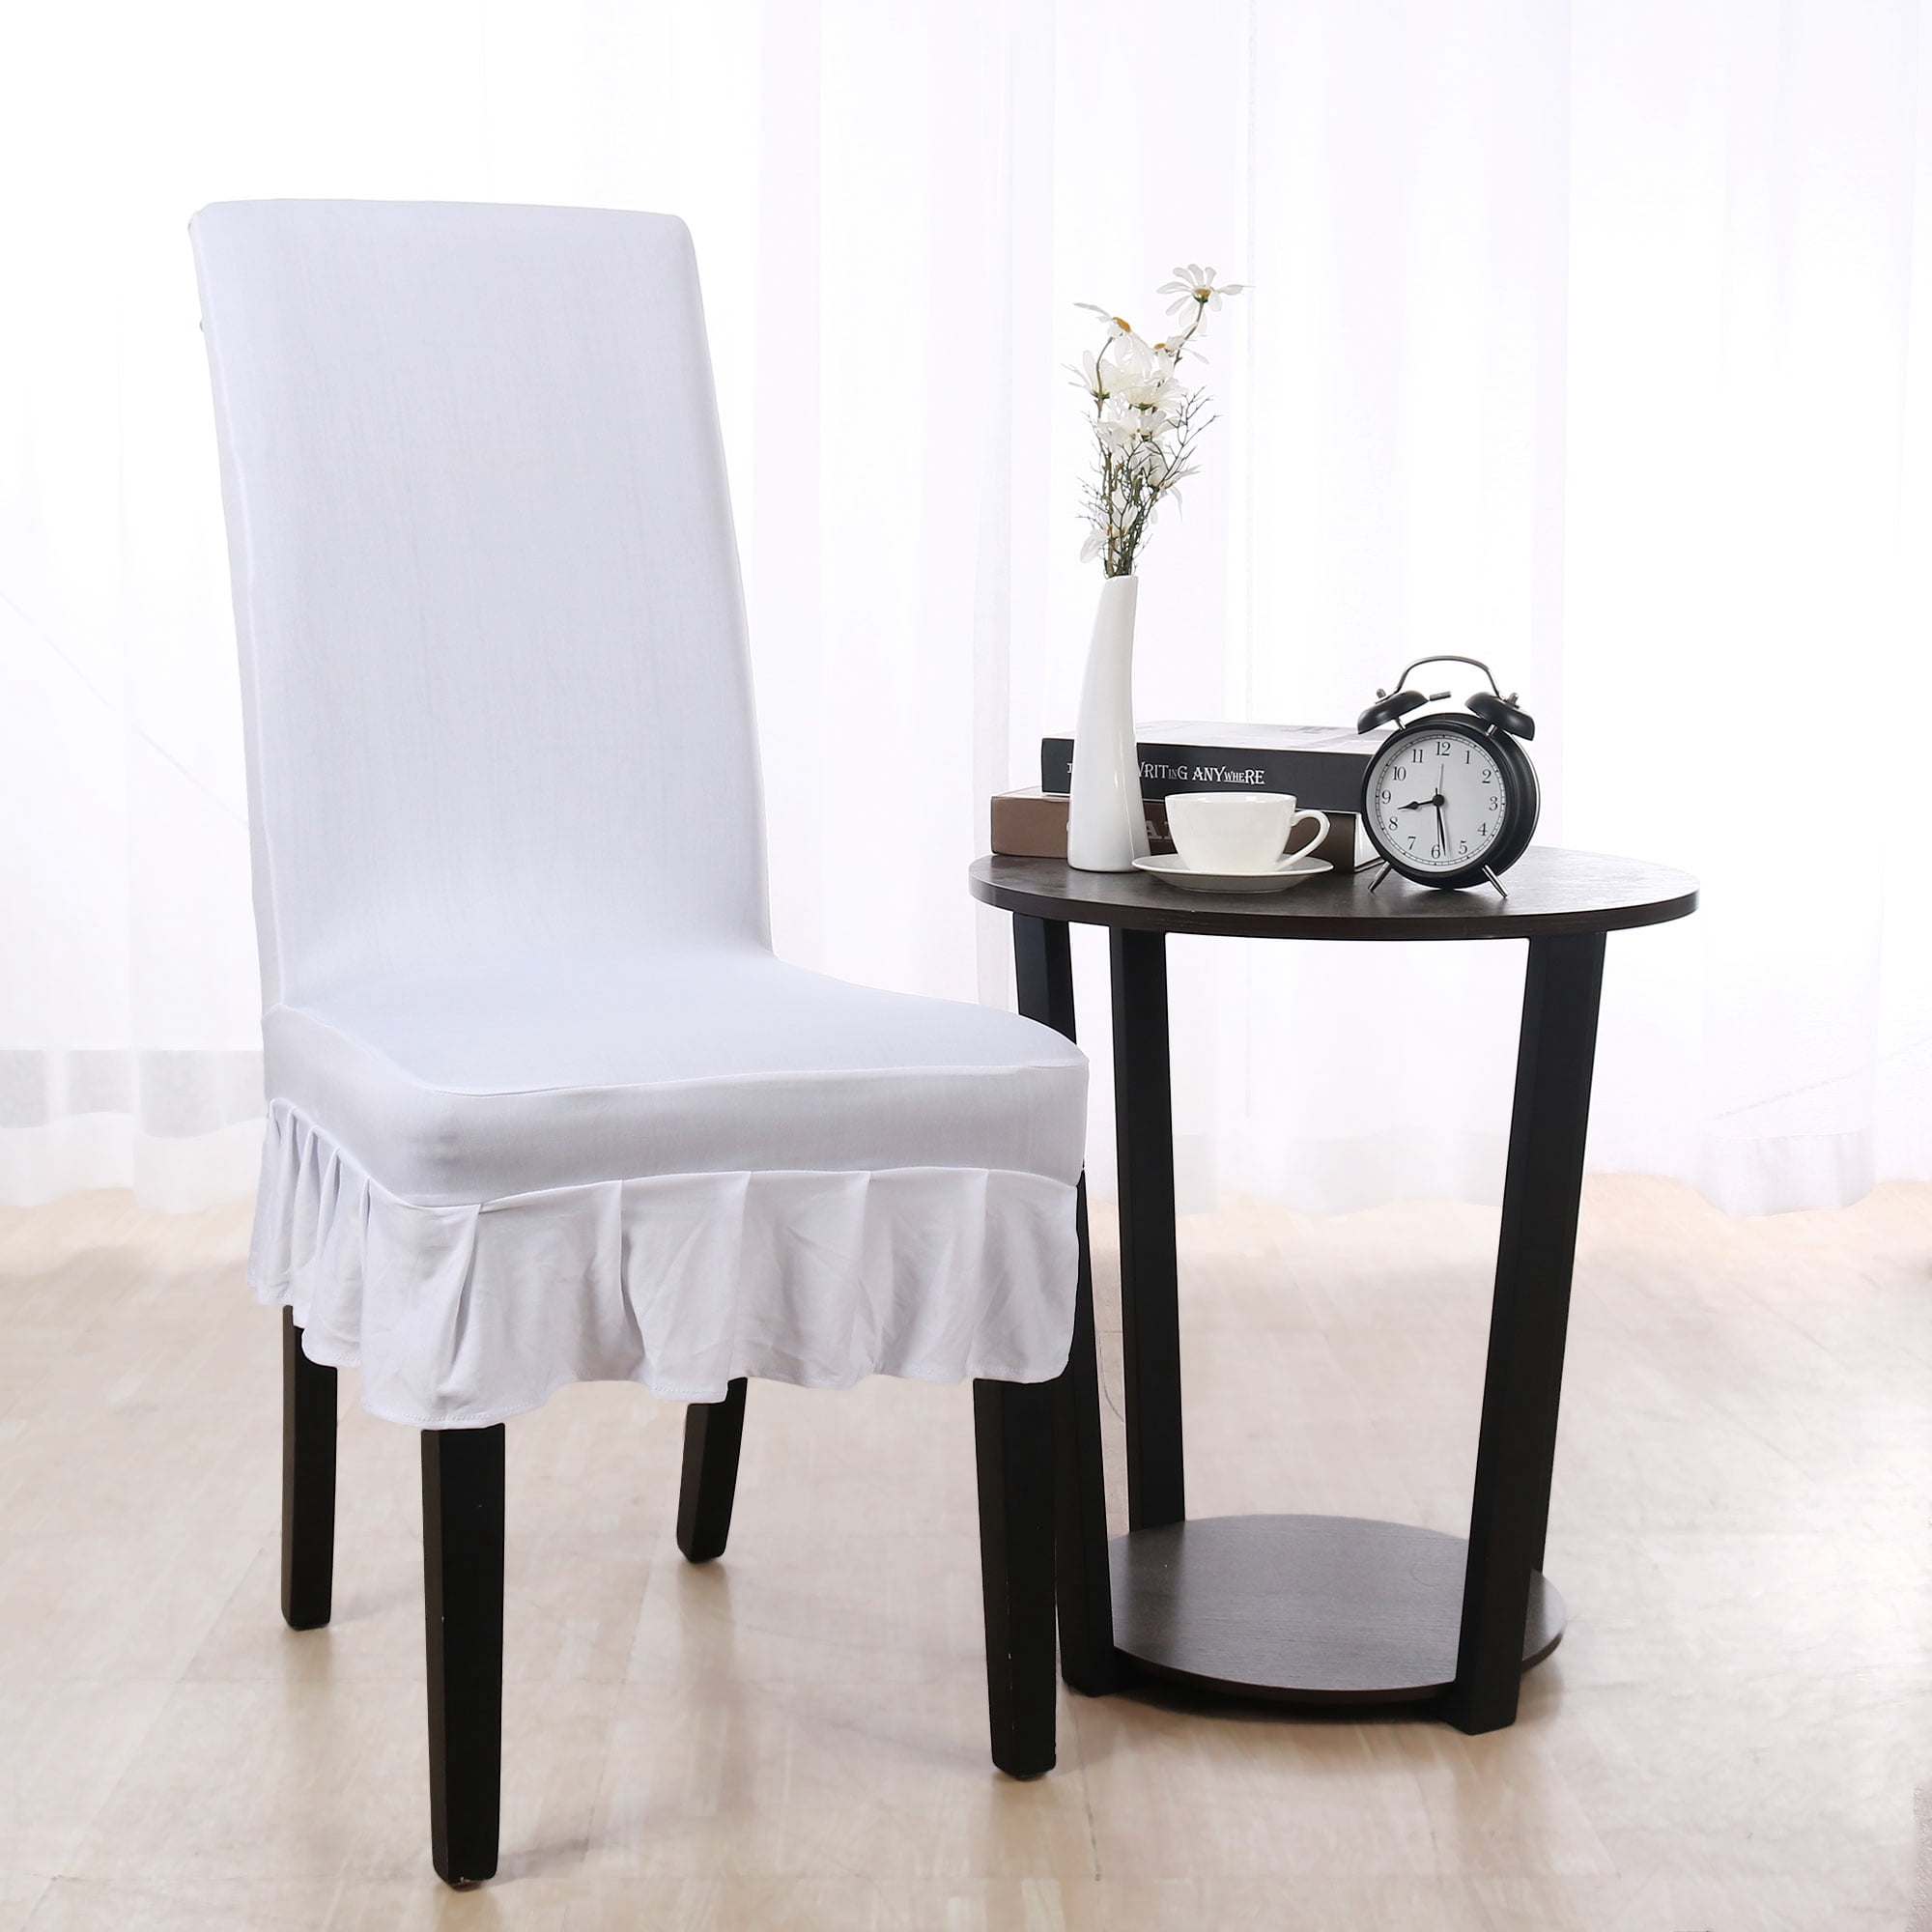 Details about   Stretch Skirt Chair Cover Dining Room Wedding Banquet Seat Cover Home Decor 